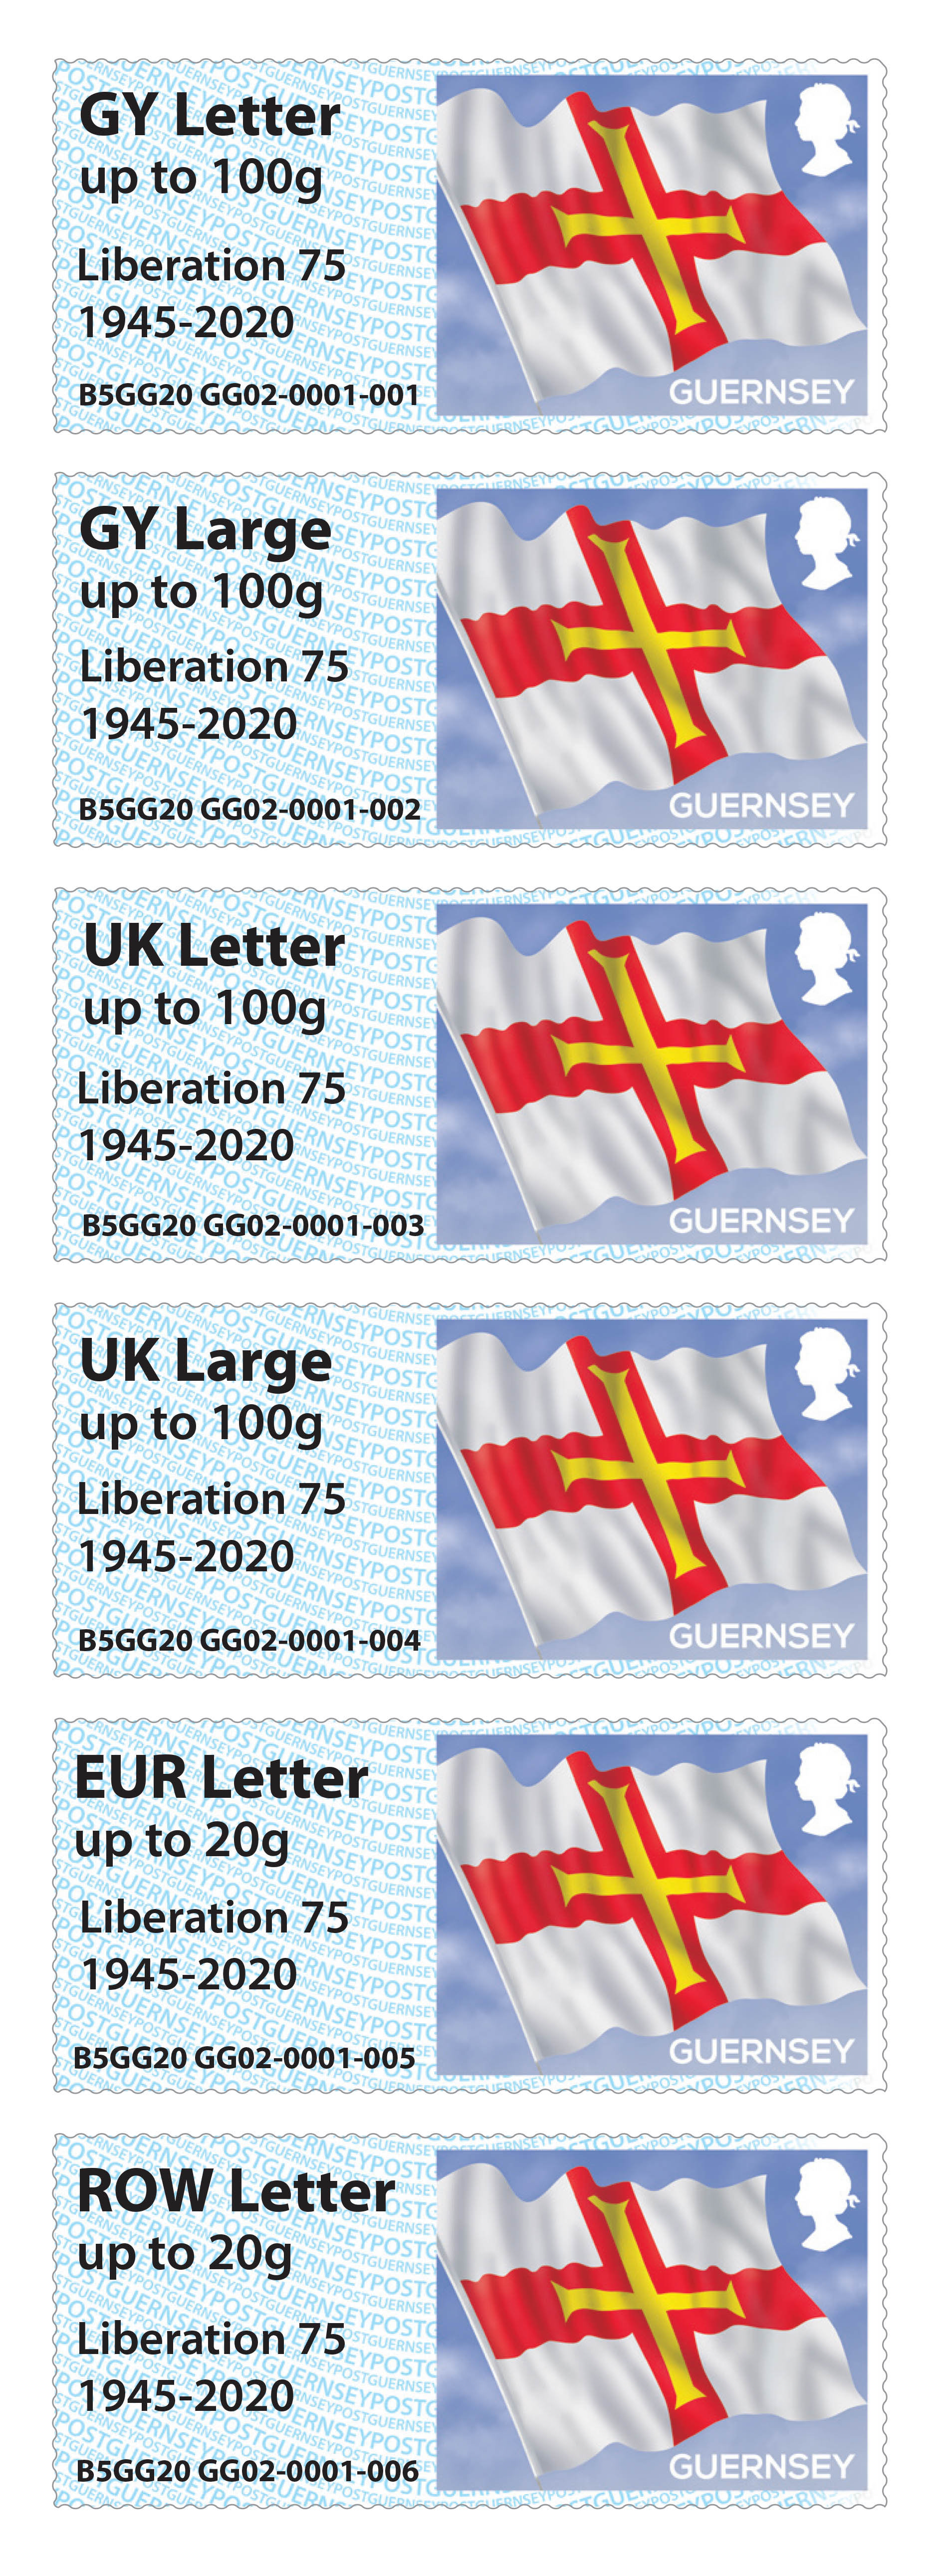 Liberation 75 Overprint for Guernsey's Post & Go stamps